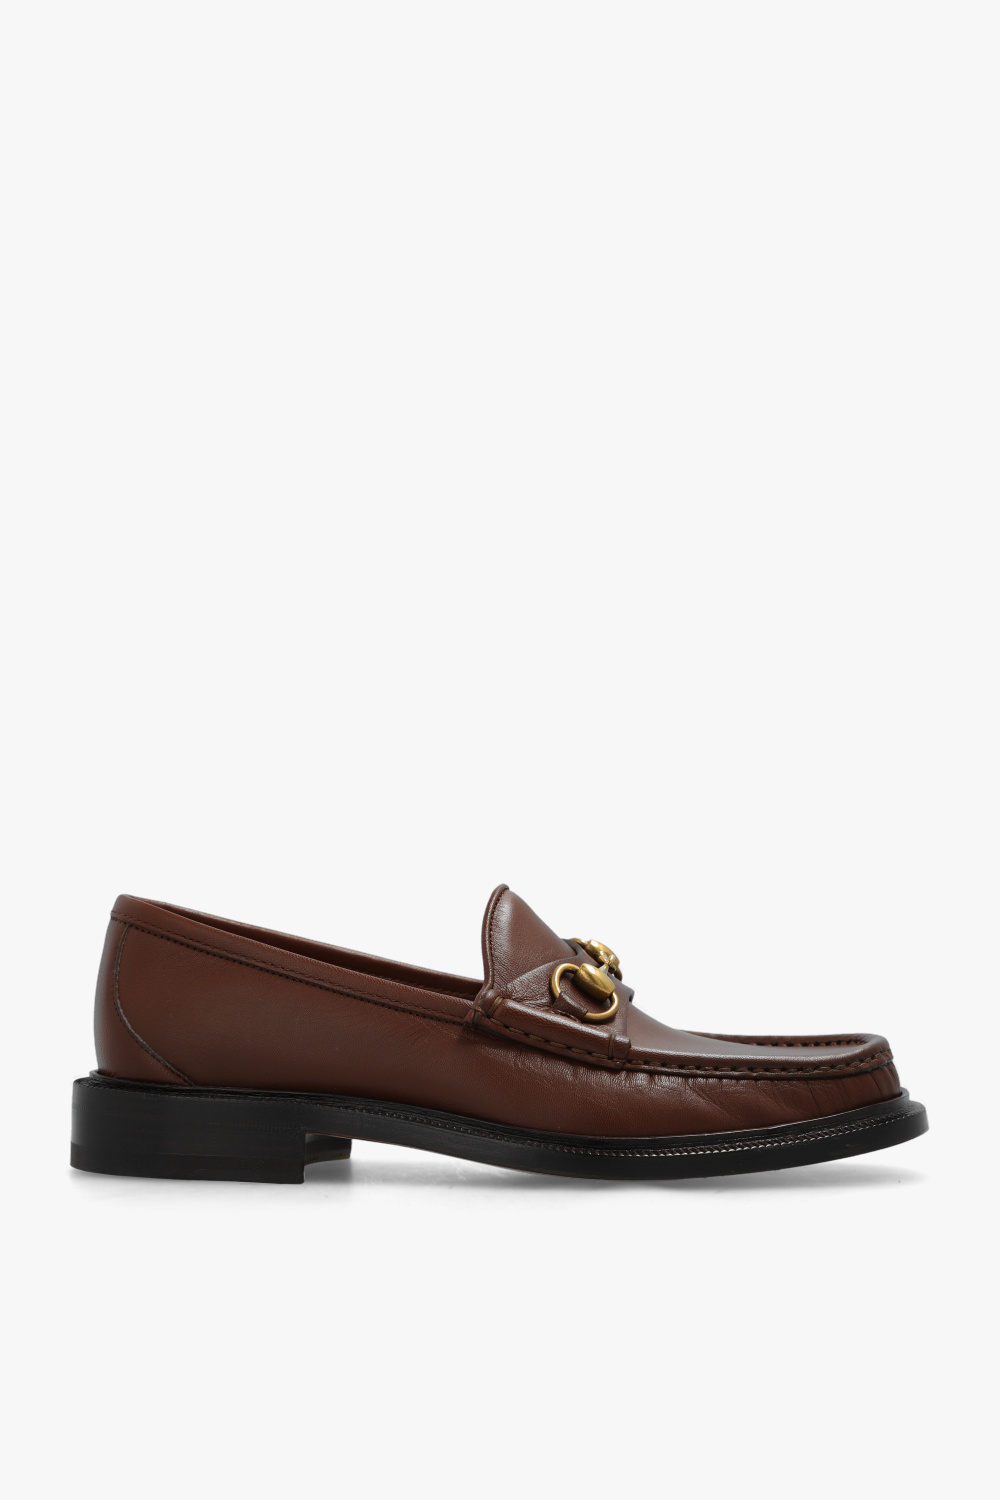 gucci Chain Leather loafers